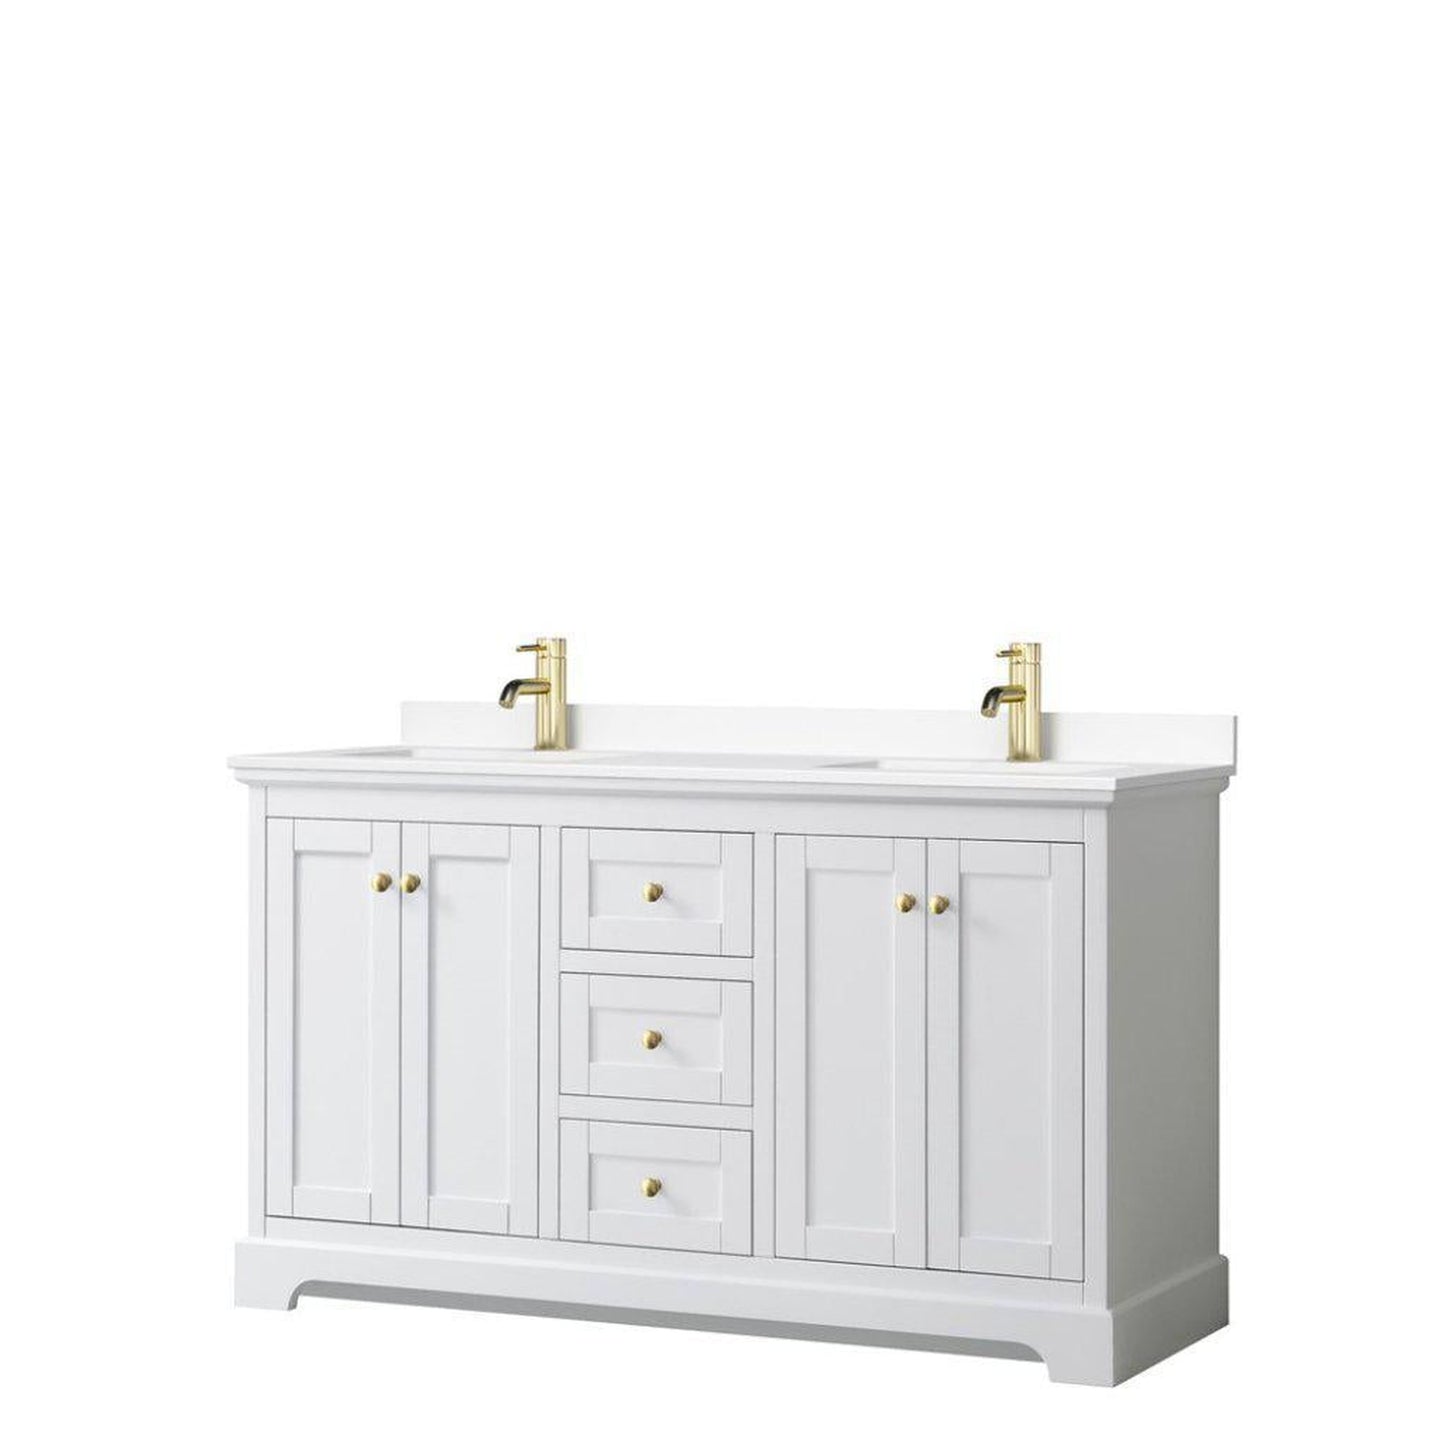 Wyndham Collection Avery 60" White Double Bathroom Vanity, White Cultured Marble Countertop With 1-Hole Faucet, Square Sink, Gold Trims